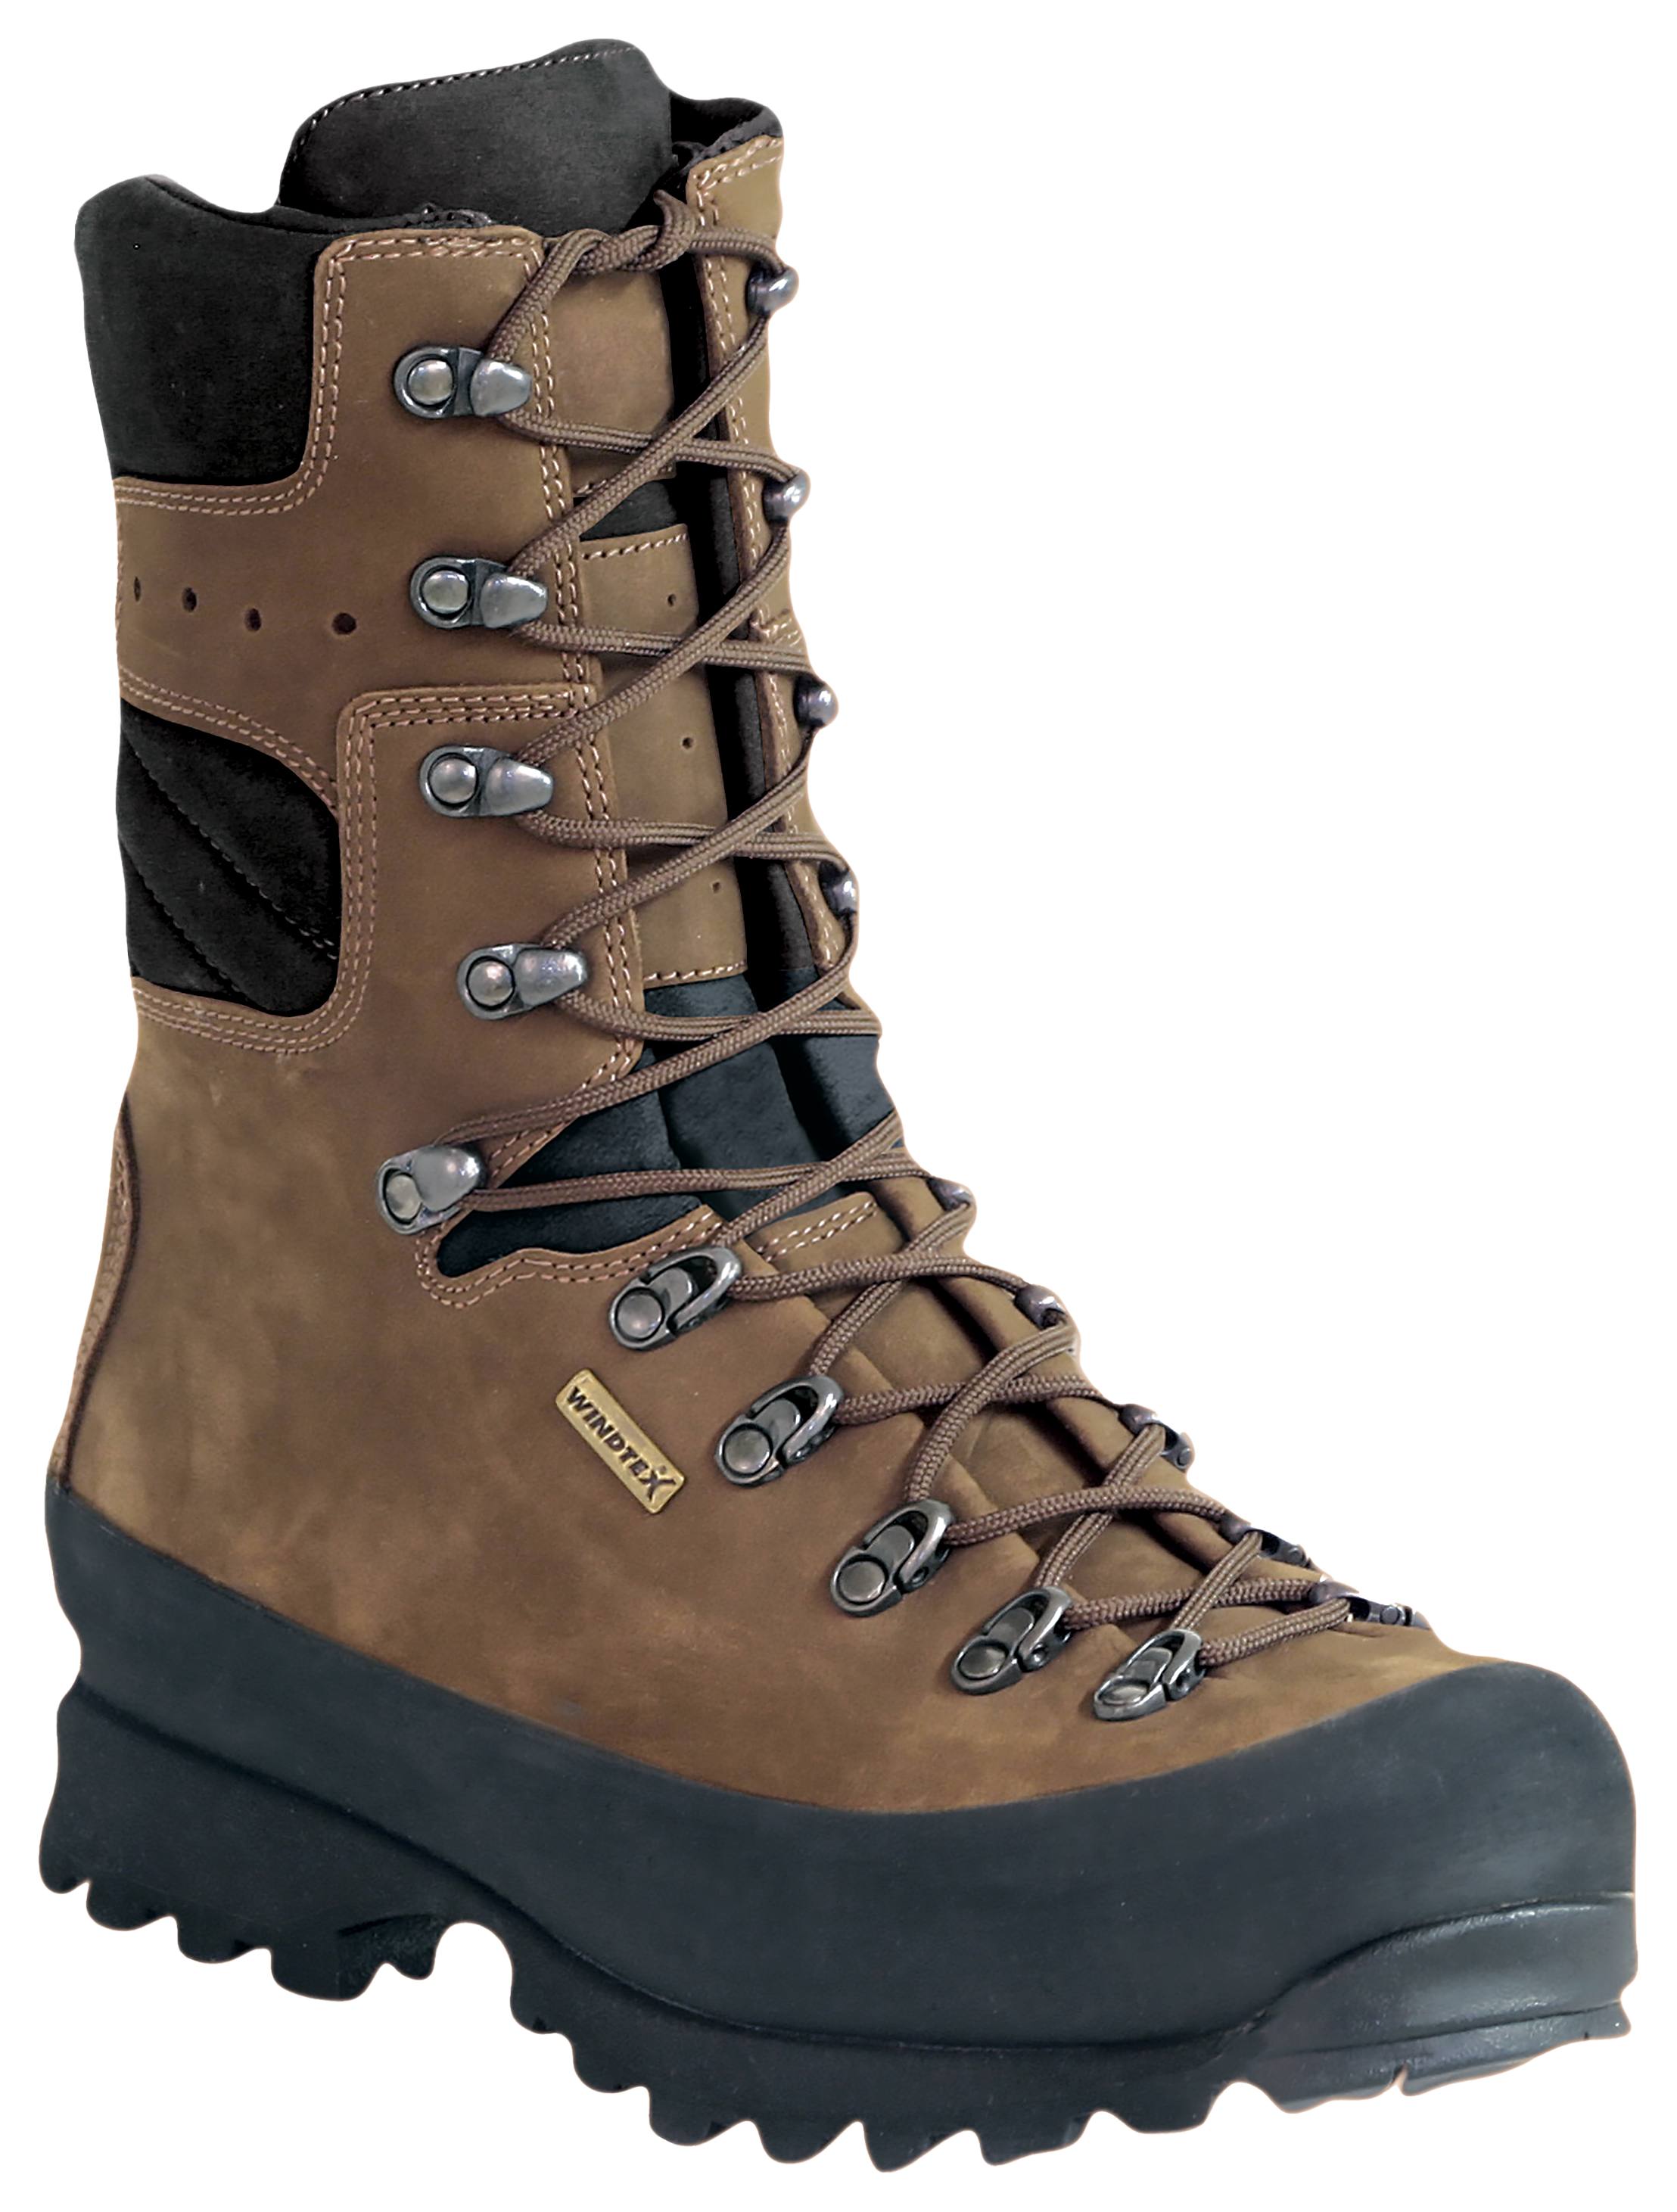 Kenetrek Mountain Extreme 1000 Insulated Waterproof Hunting Boots for Men - Brown - 9.5M